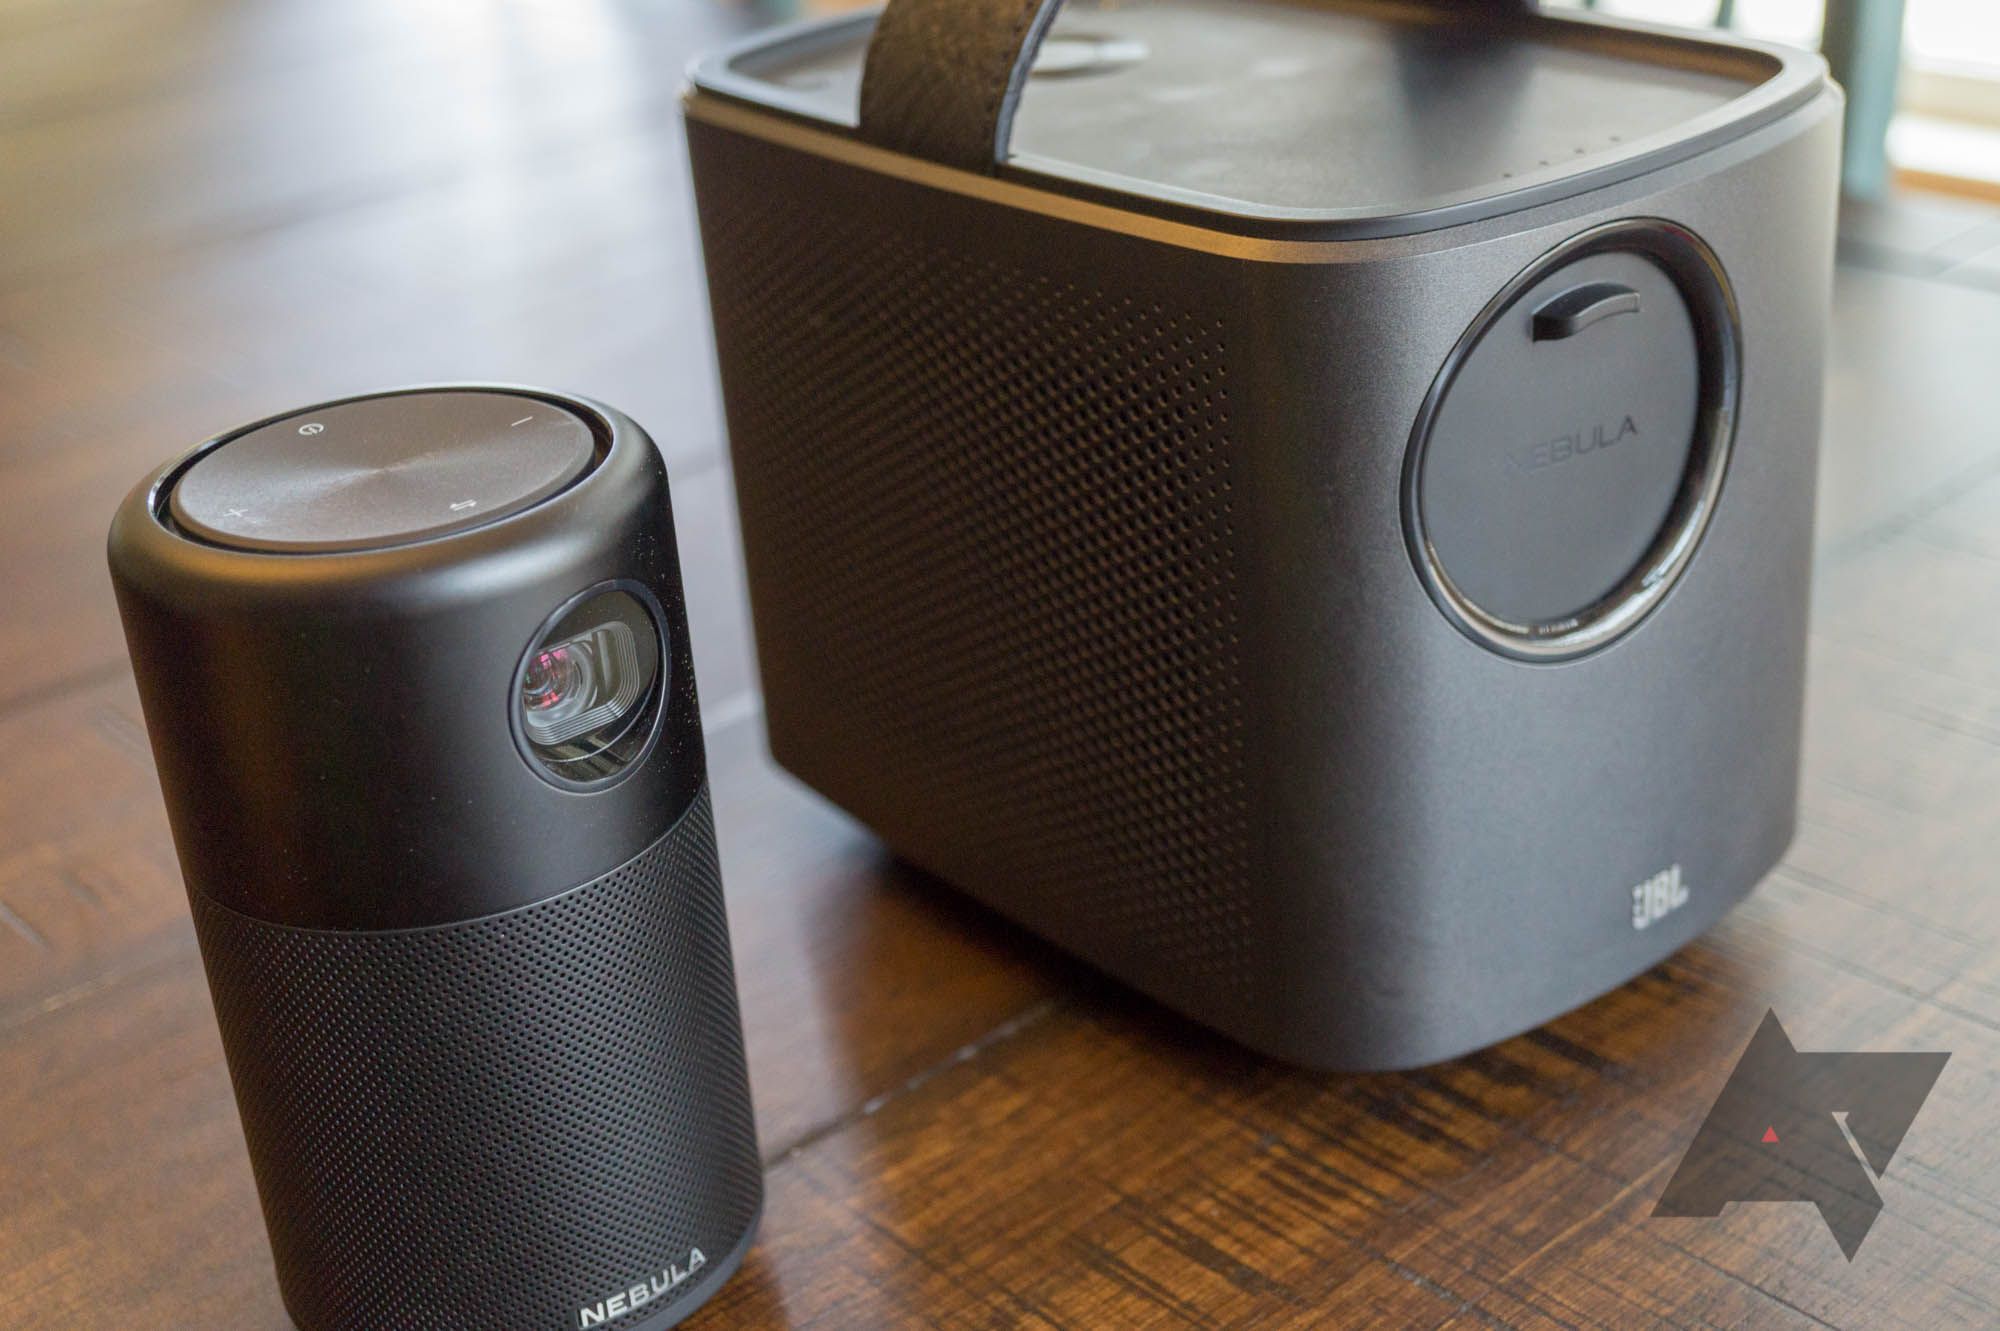 Anker Nebula Capsule review: The best portable projector, but it